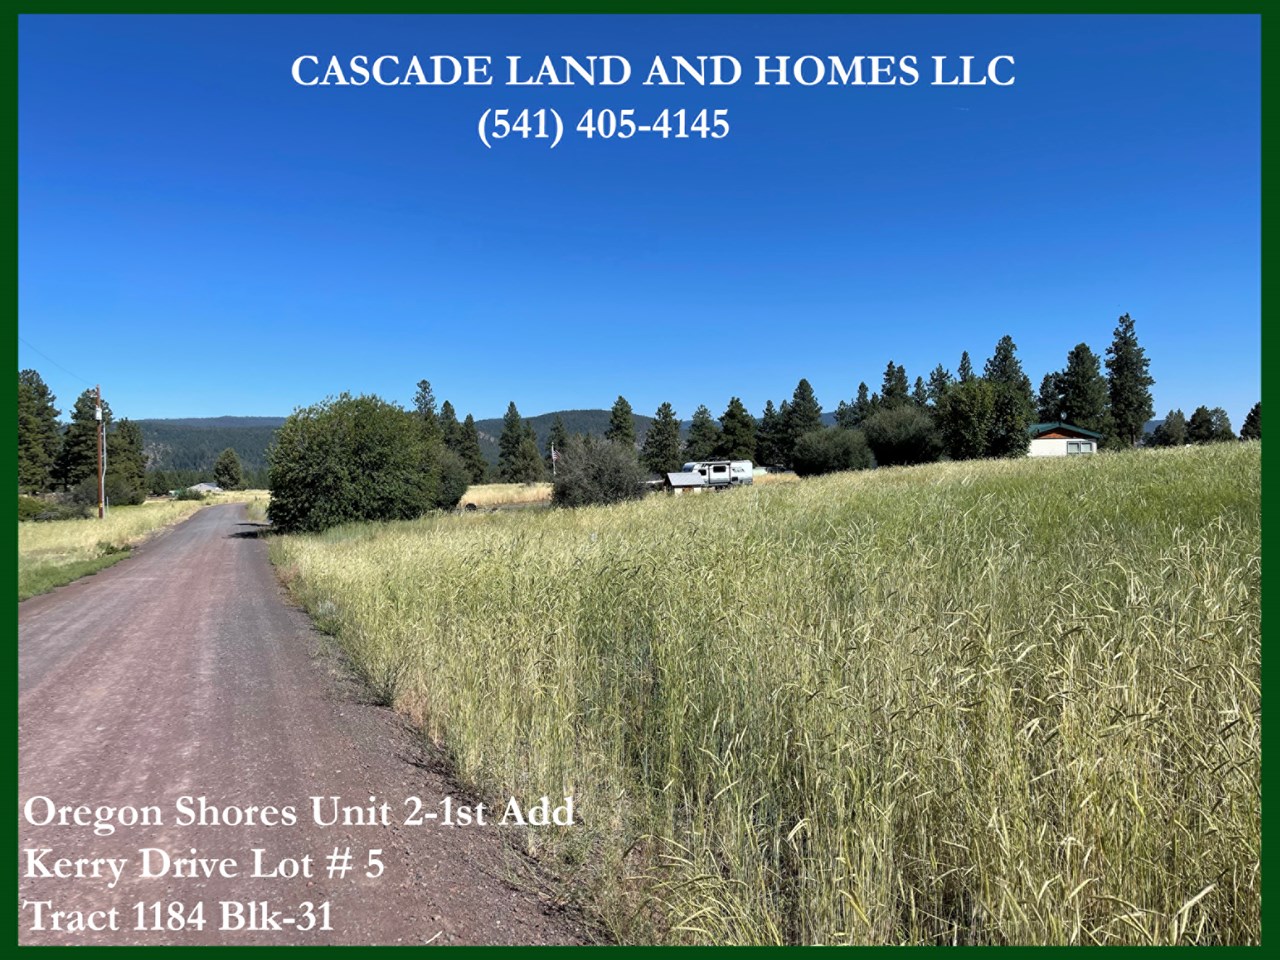 this beautiful parcel has a gentle slope upward from the road, perfect for a new homesite!